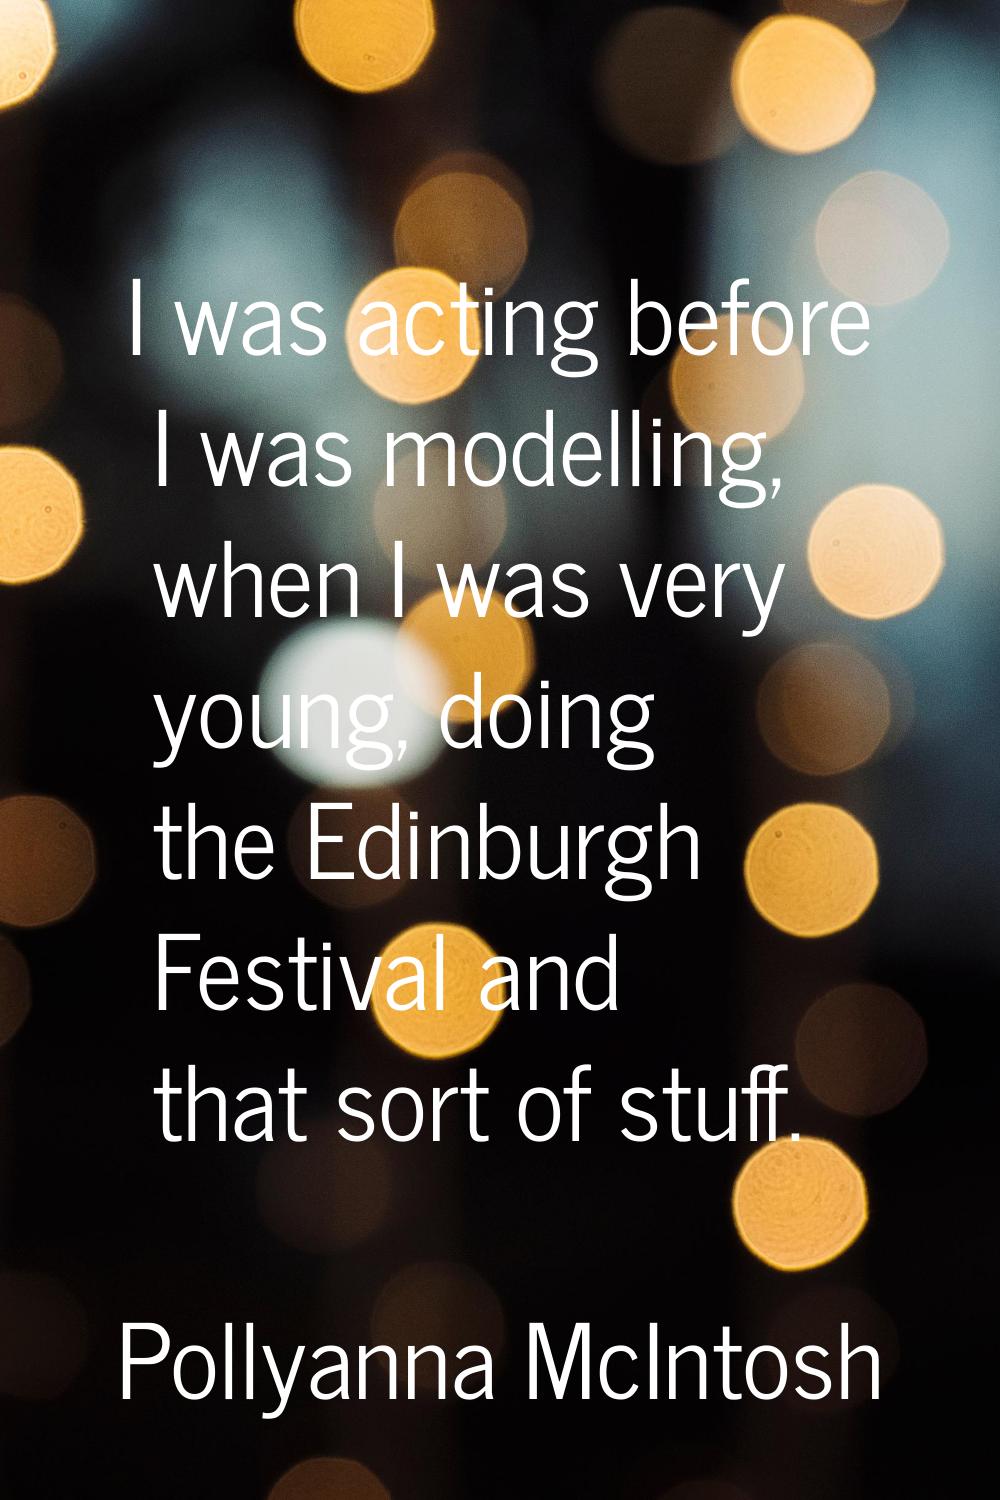 I was acting before I was modelling, when I was very young, doing the Edinburgh Festival and that s